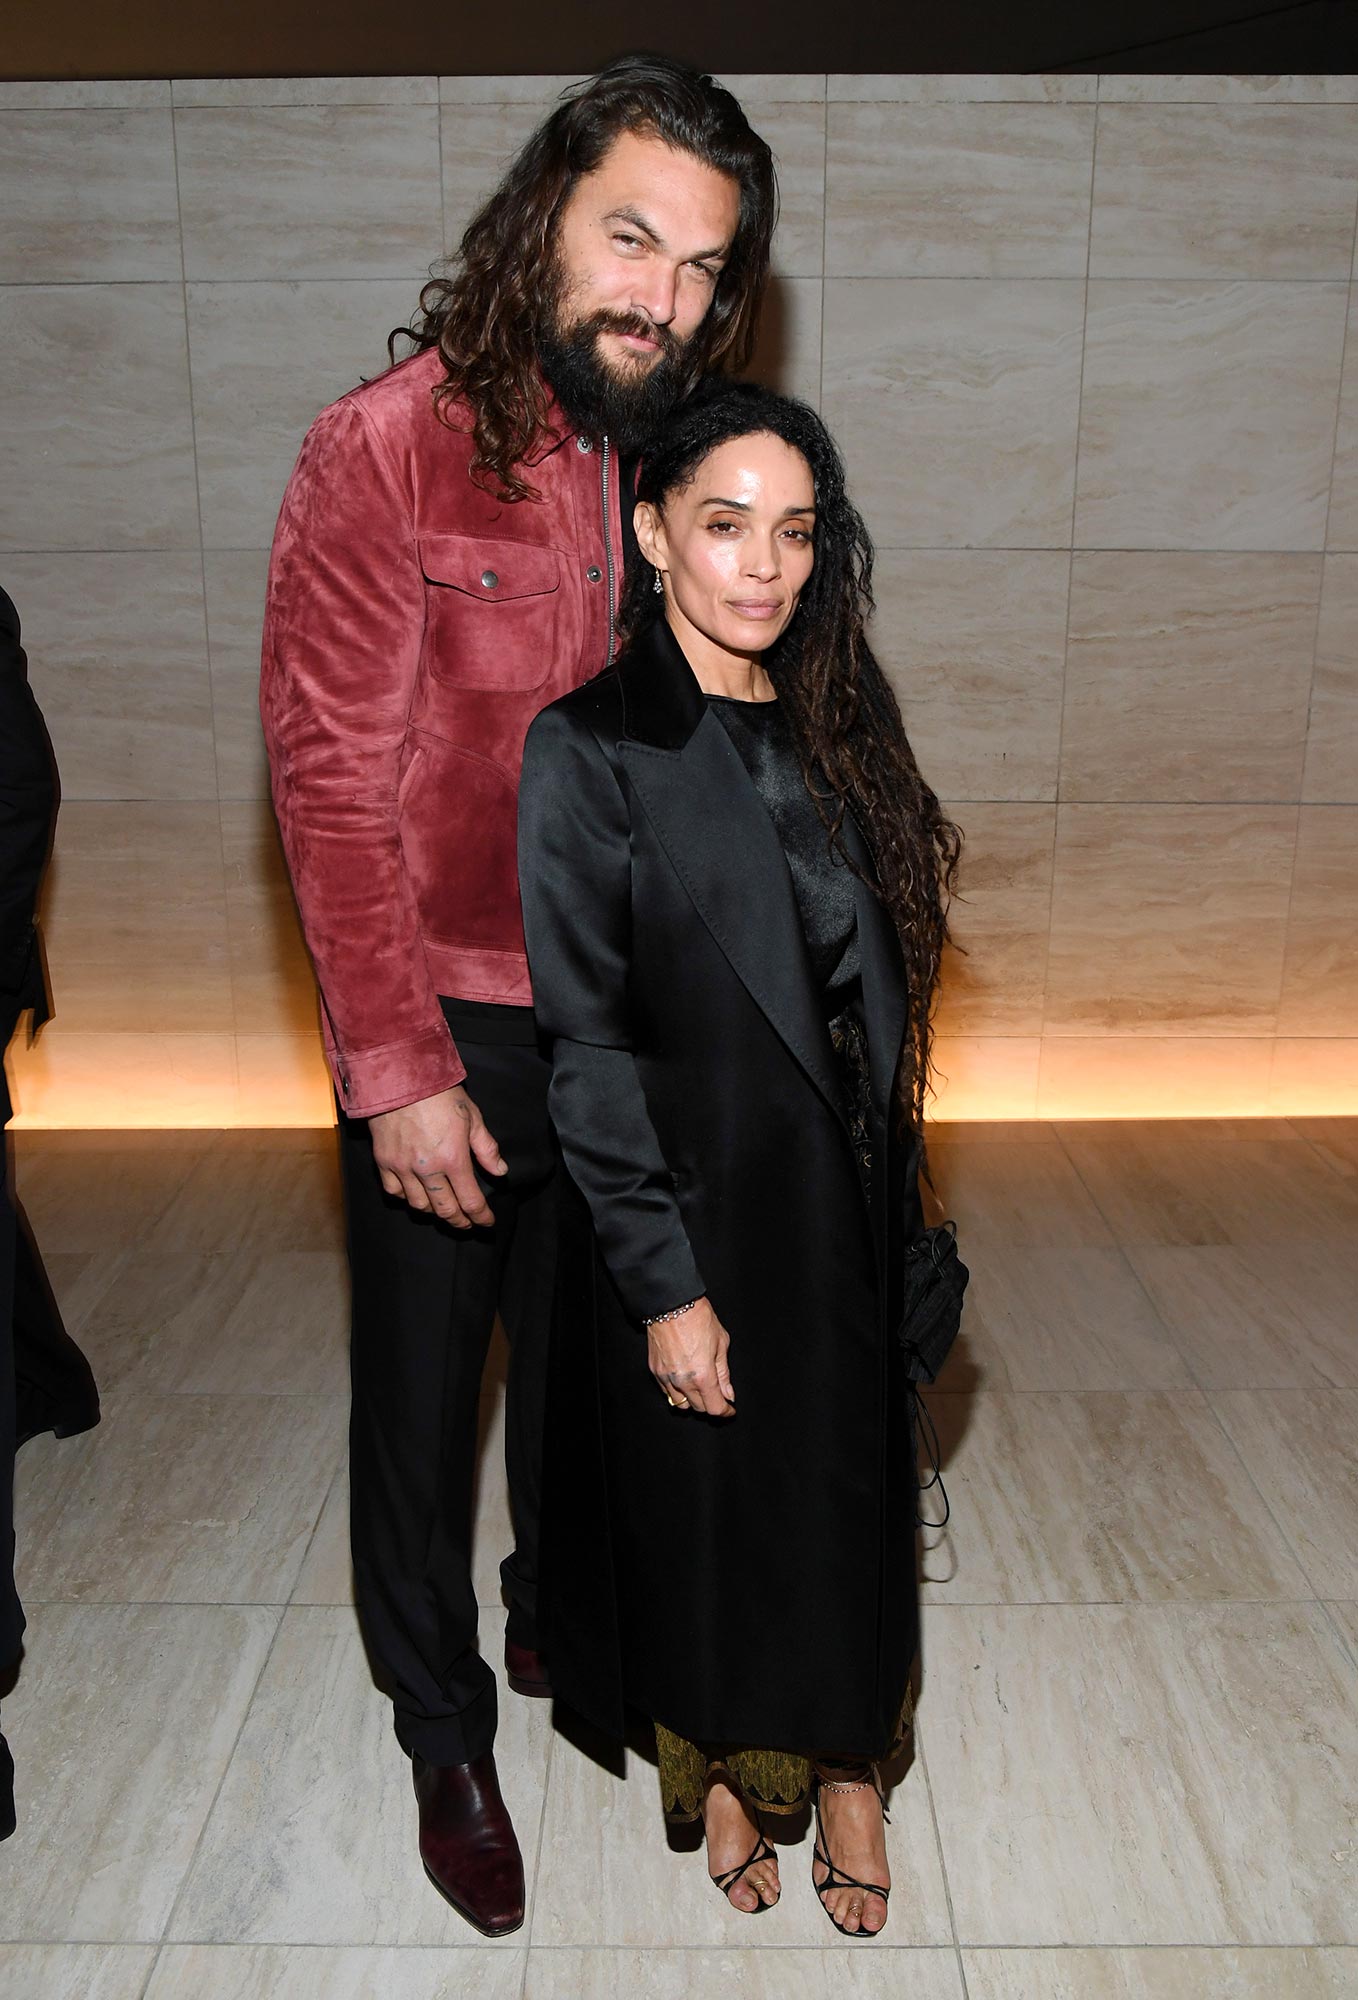 Lisa Officially Files for Divorce from Jason Momoa Almost 24